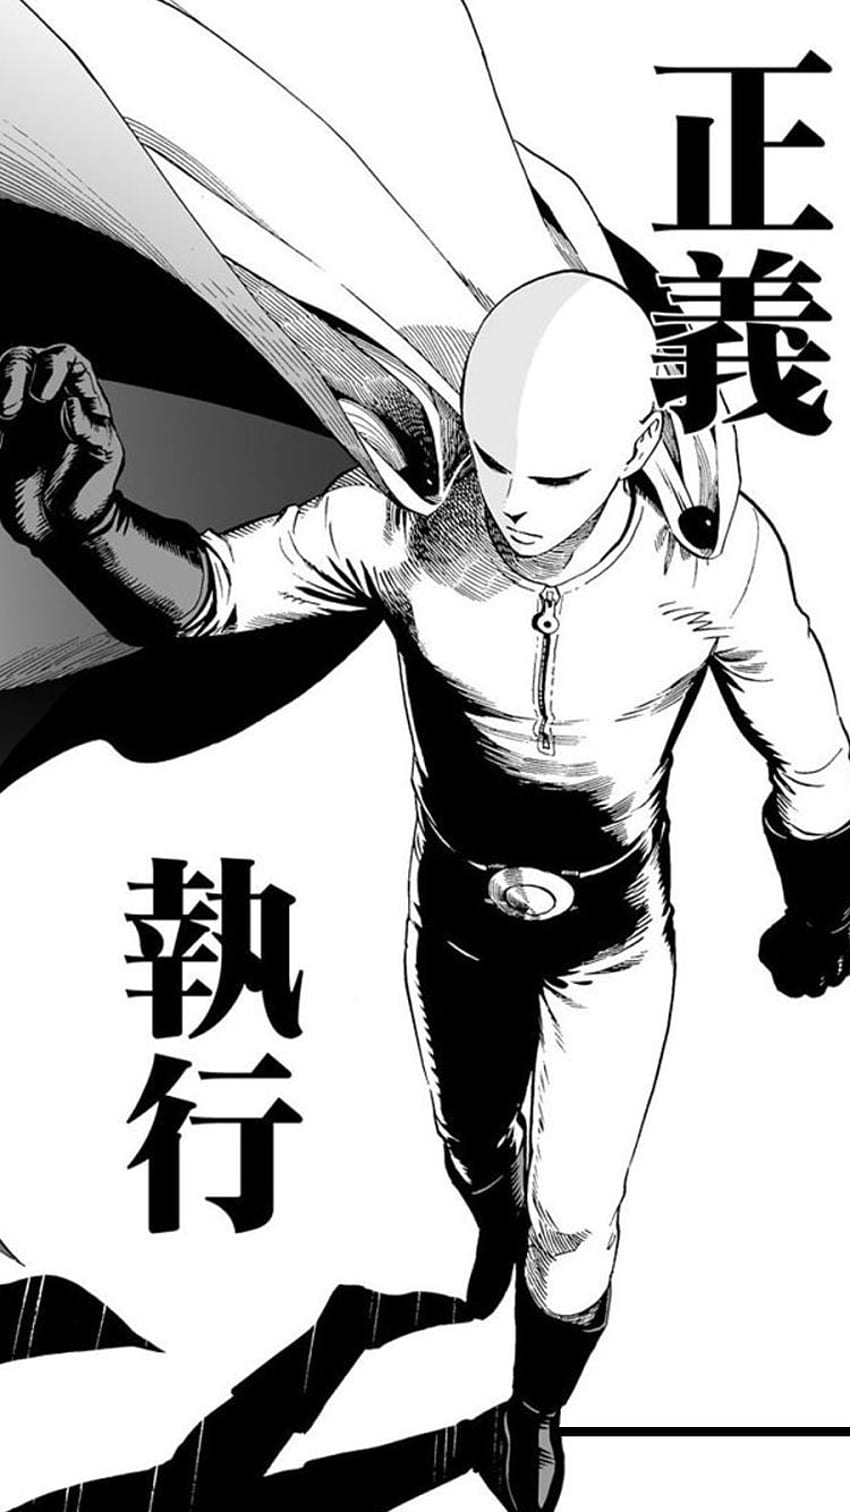 Simple Saitama wallpaper I just made for personal use. (2560 x